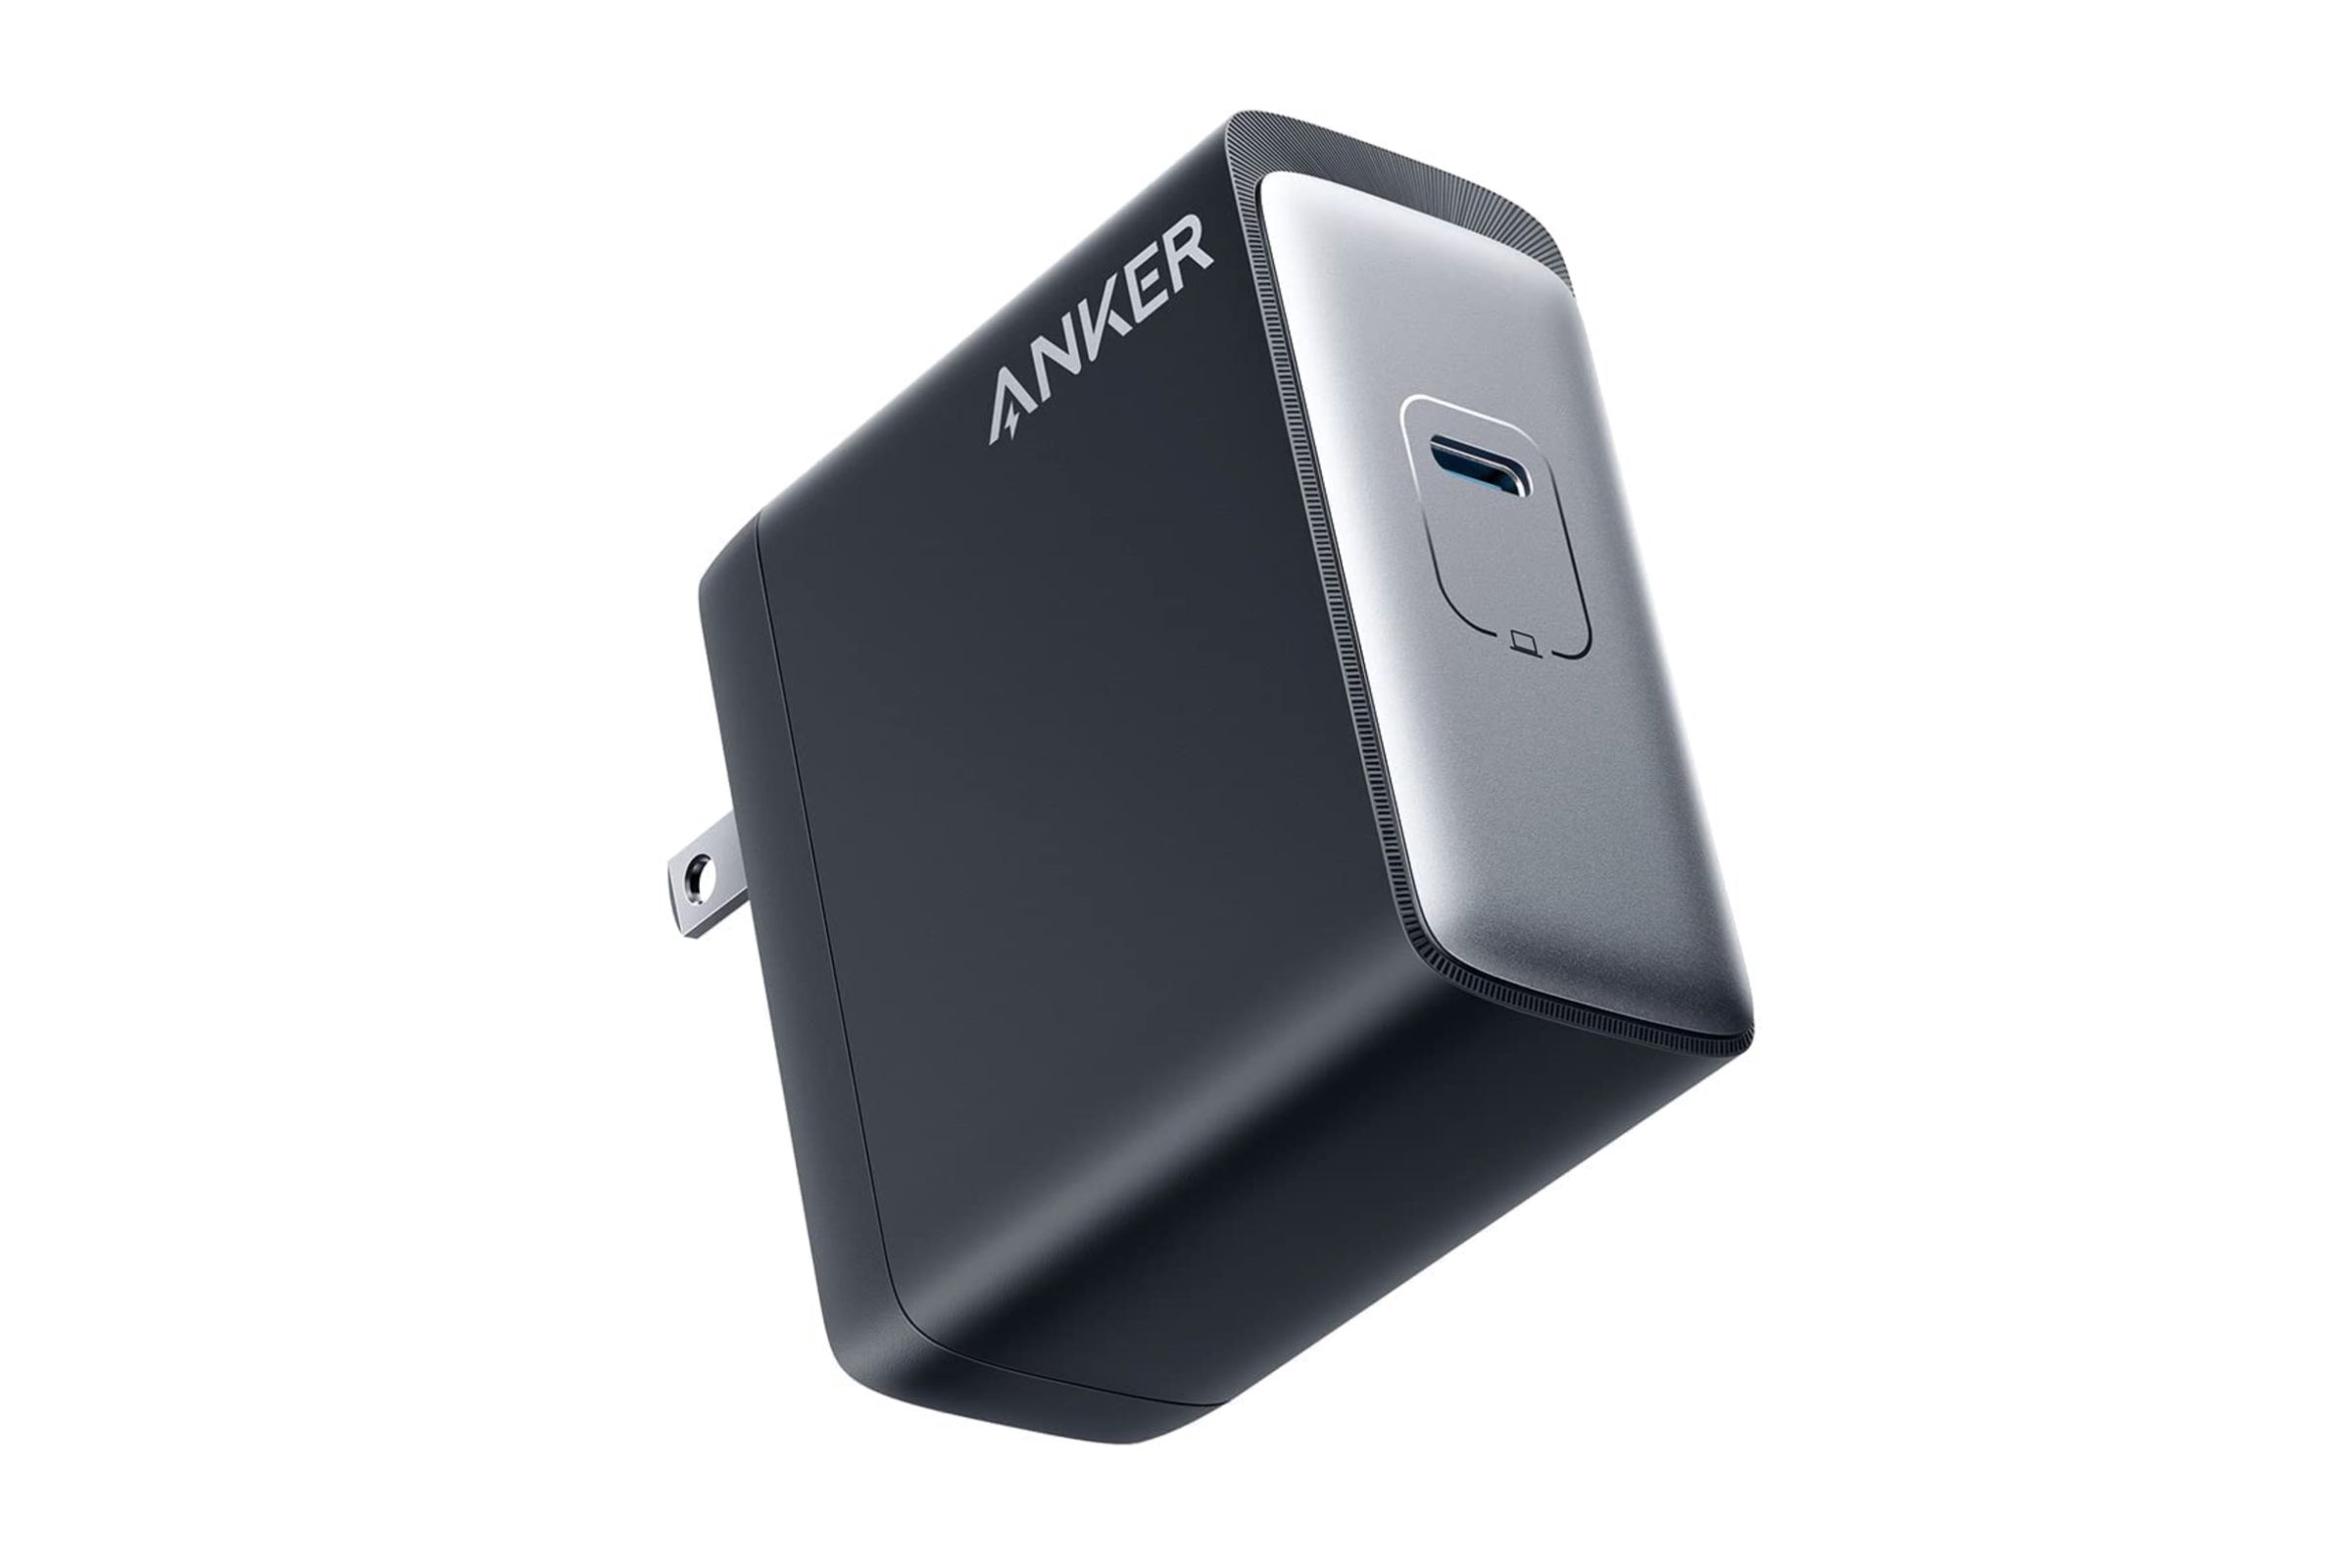 The Anker 717 also has the USB PD 3.1 Spec for 140W, but only has one port.